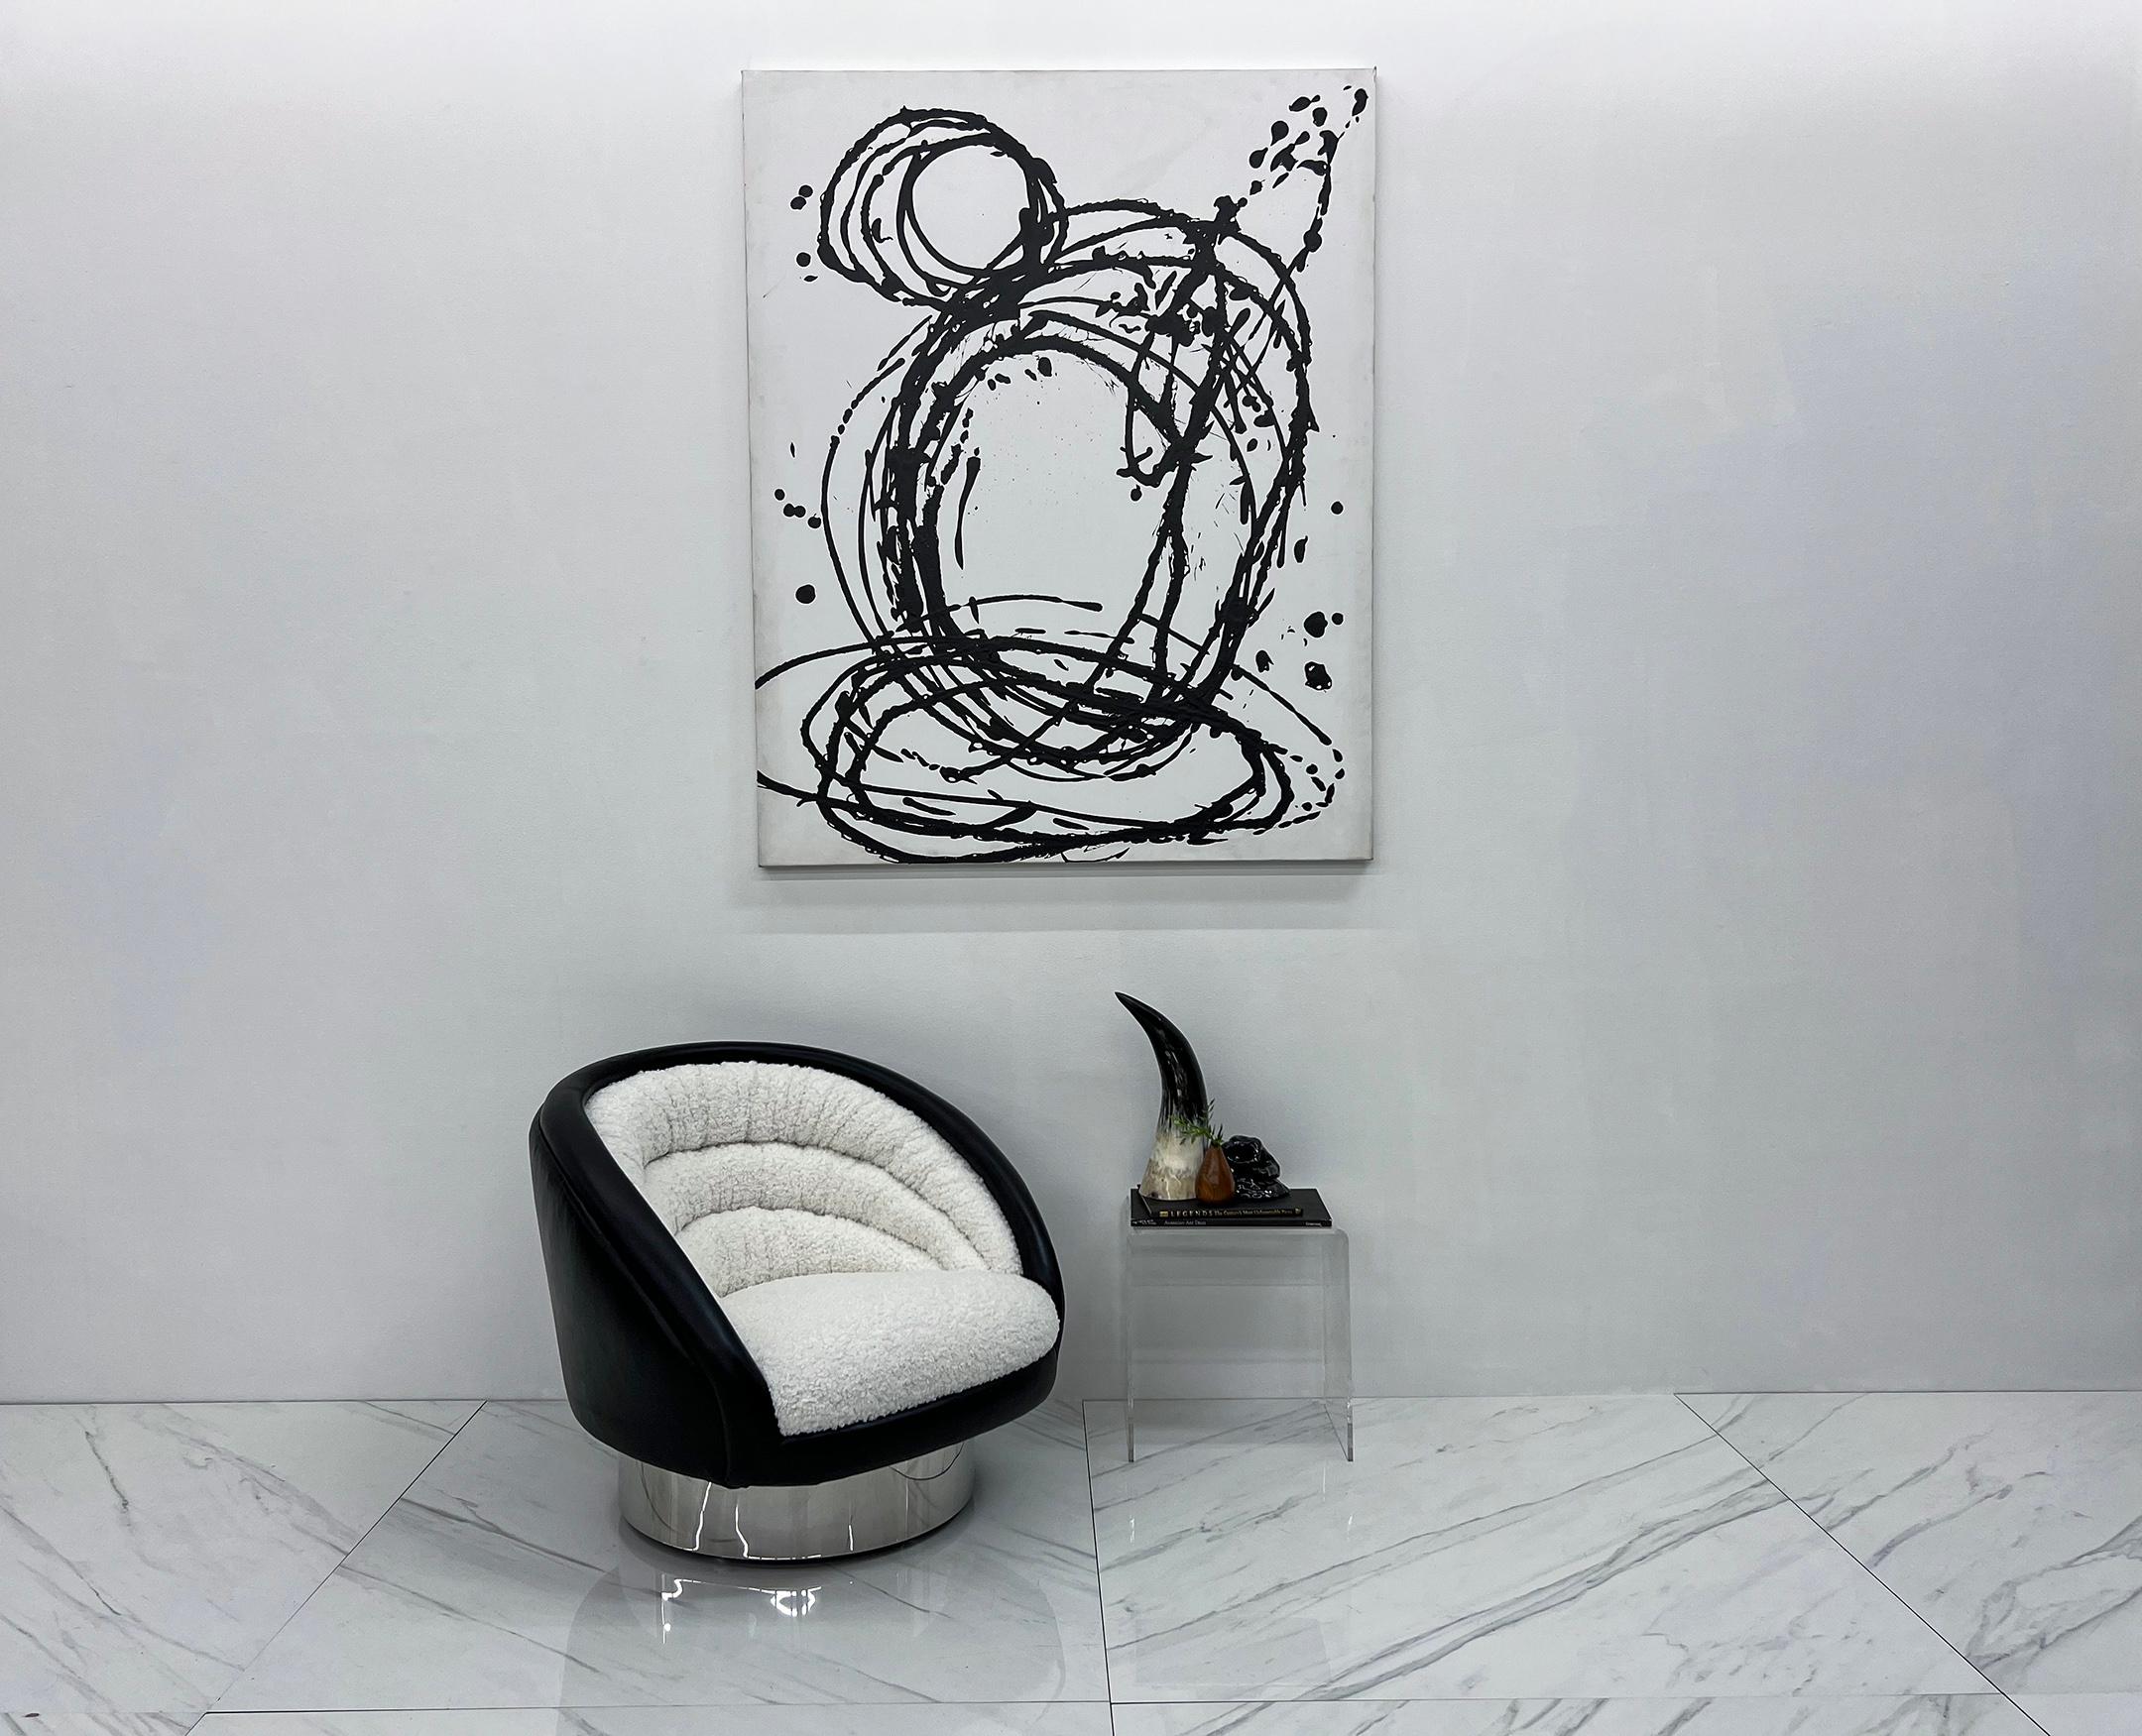 This chair is incredible. Designed by Vladimir Kagan for Vladimir Kagan Designs, this crescent chair is about as luxurious and beautiful as it gets. Completely overhauled and upholstered in a thick, high-pile, sherpa style boucle and wrapped in the